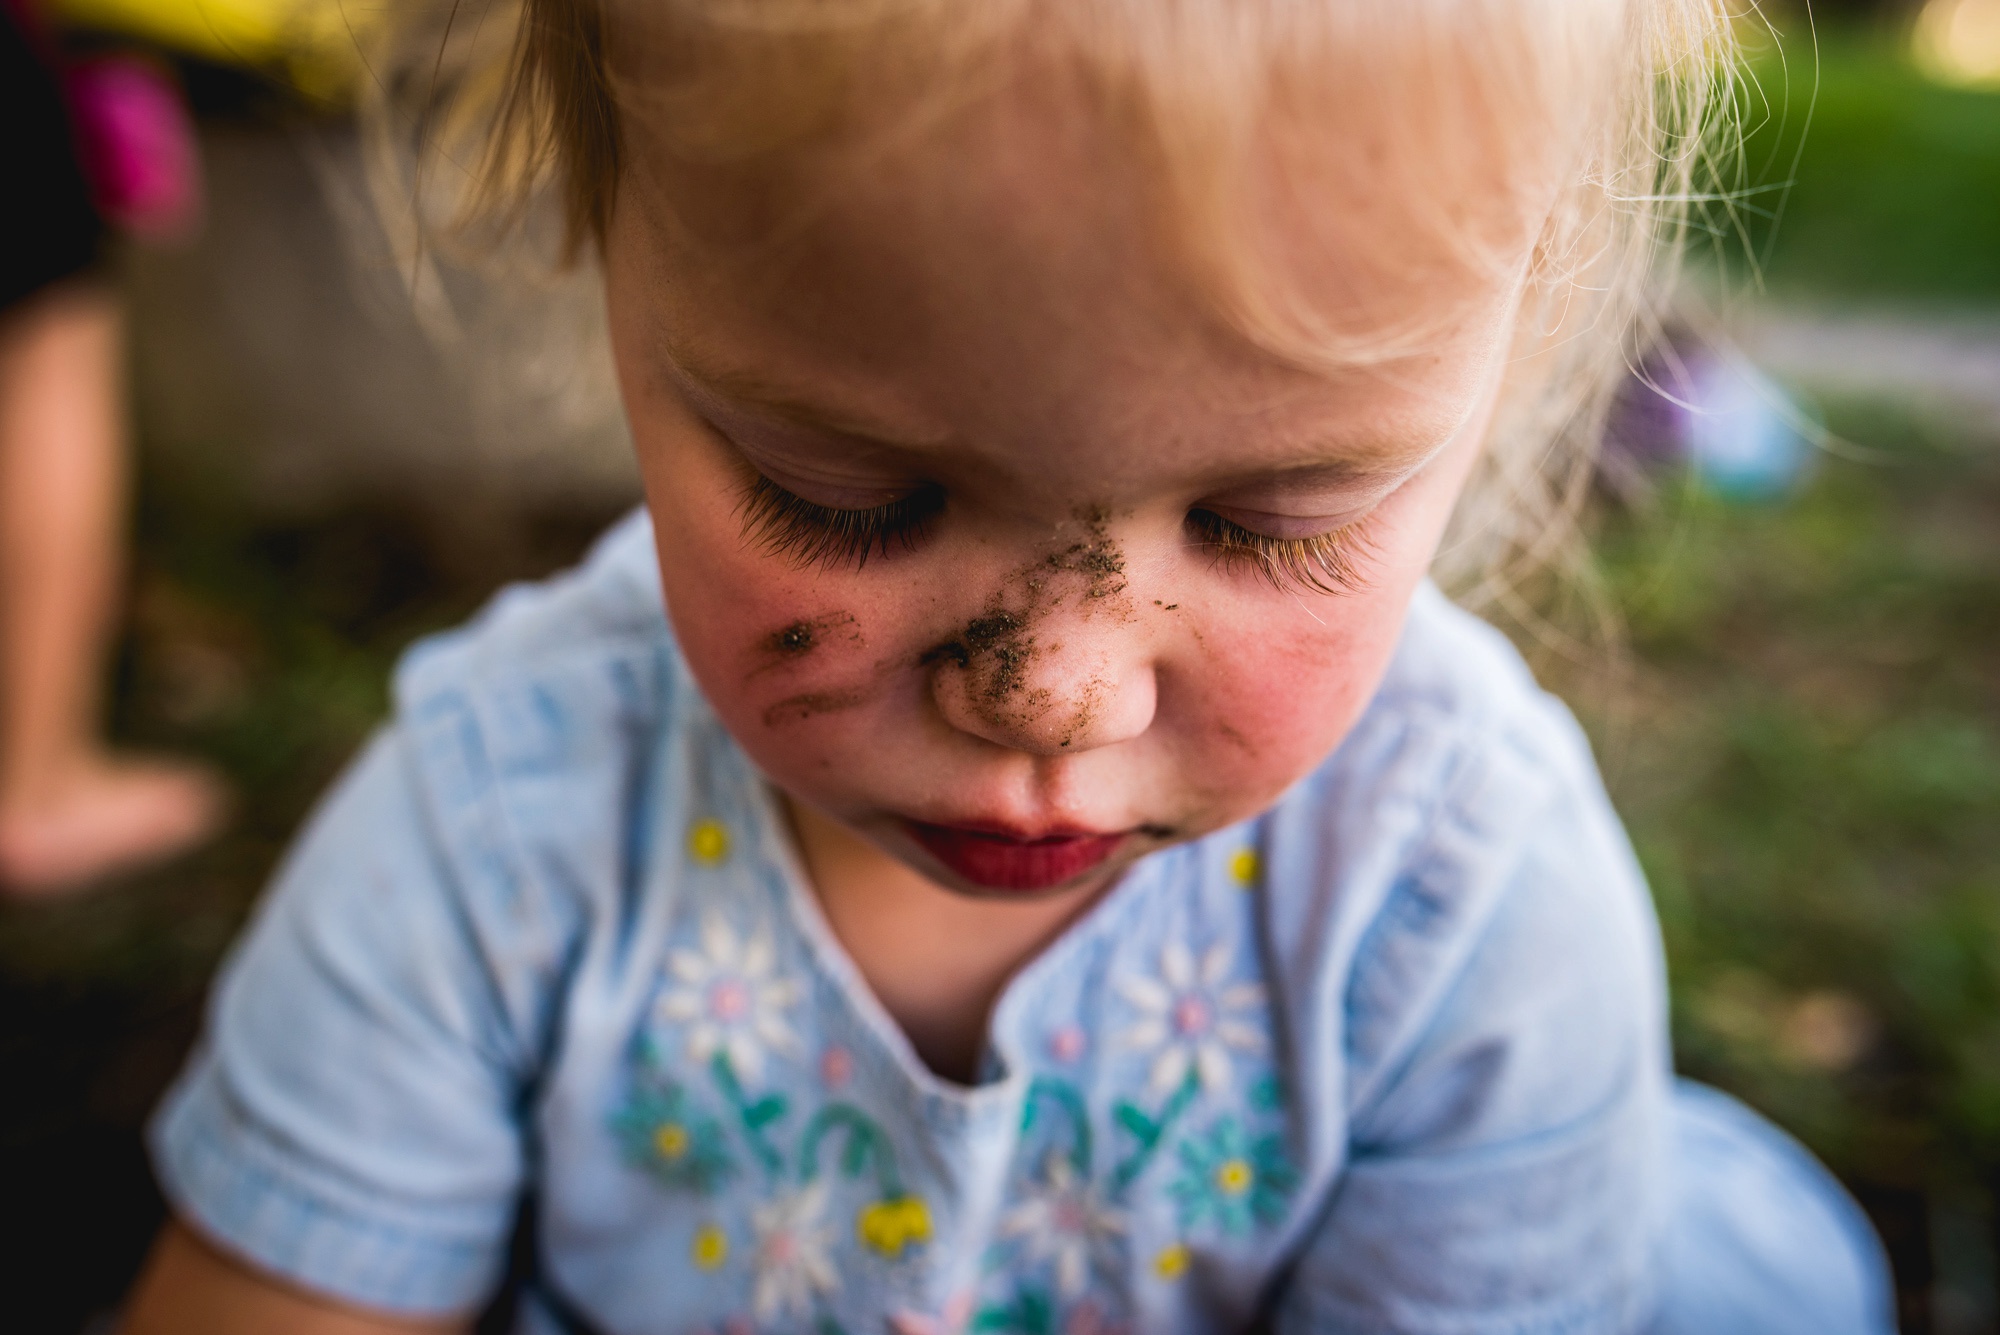 playing in mud, lifestyle pictures of kids, sisters, Creating Childhood Memories in the Mud